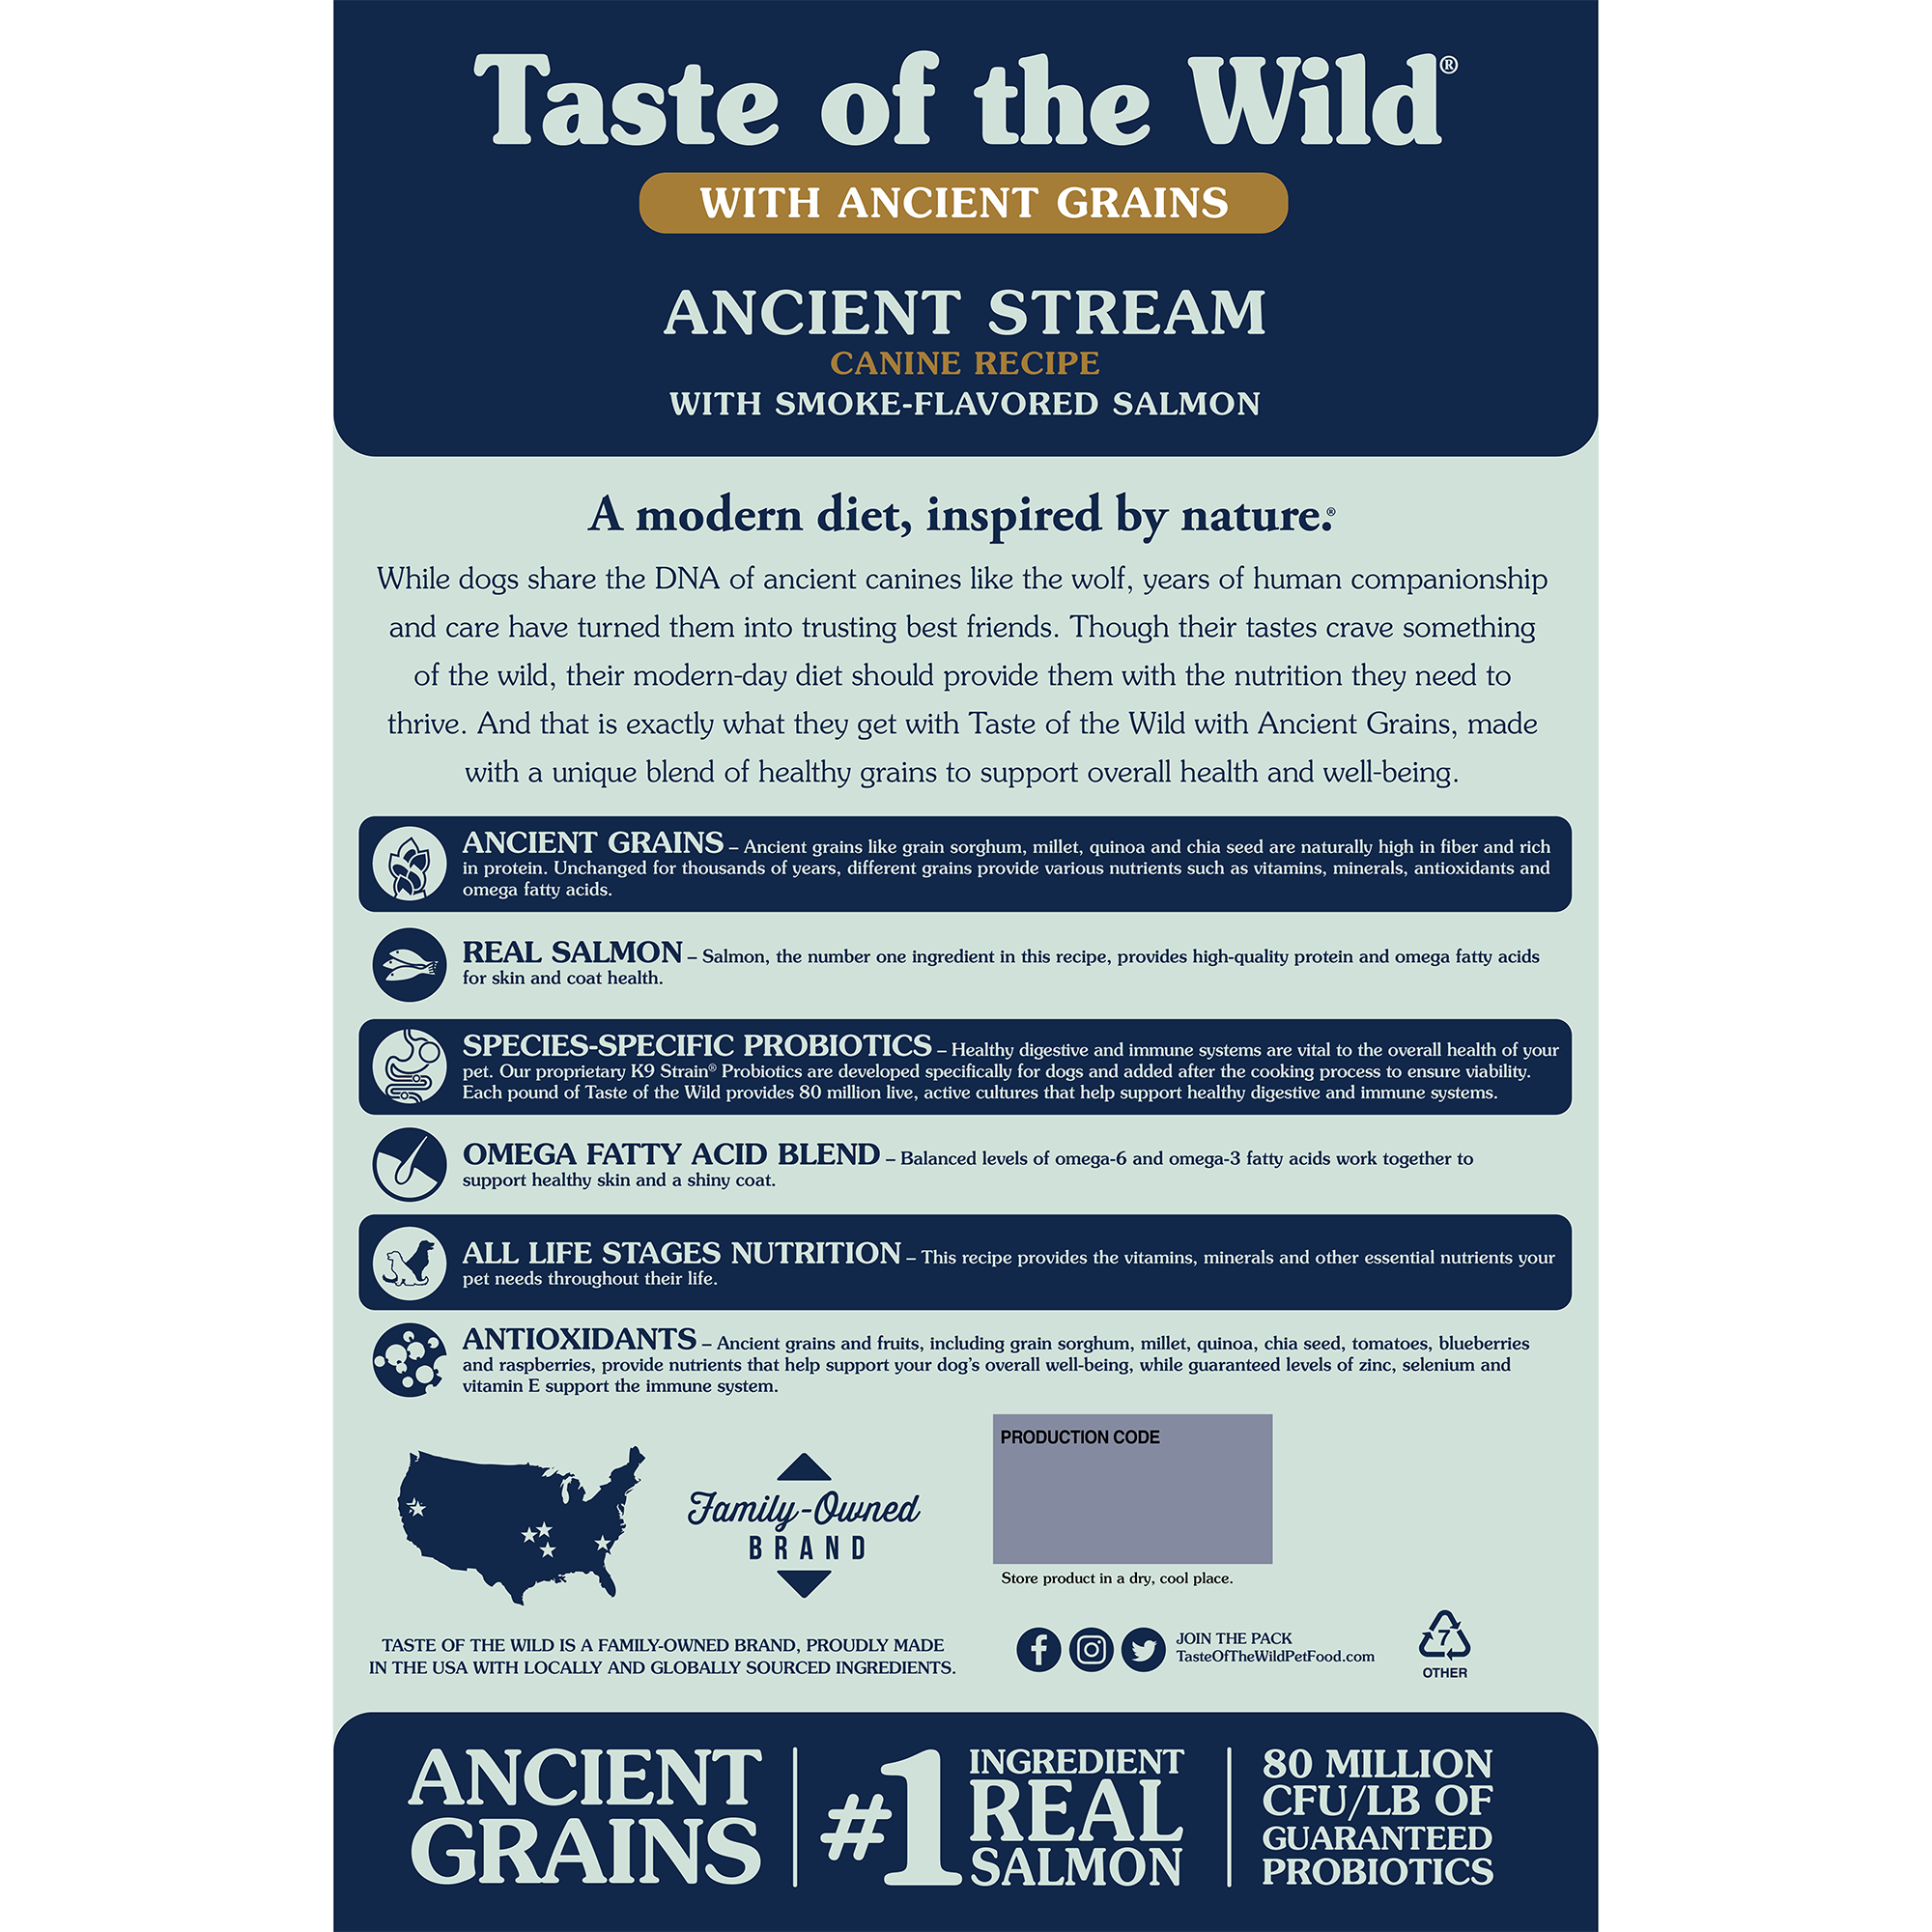 The back of a bag of Ancient Stream Canine Recipe with Smoke-Flavored Salmon.